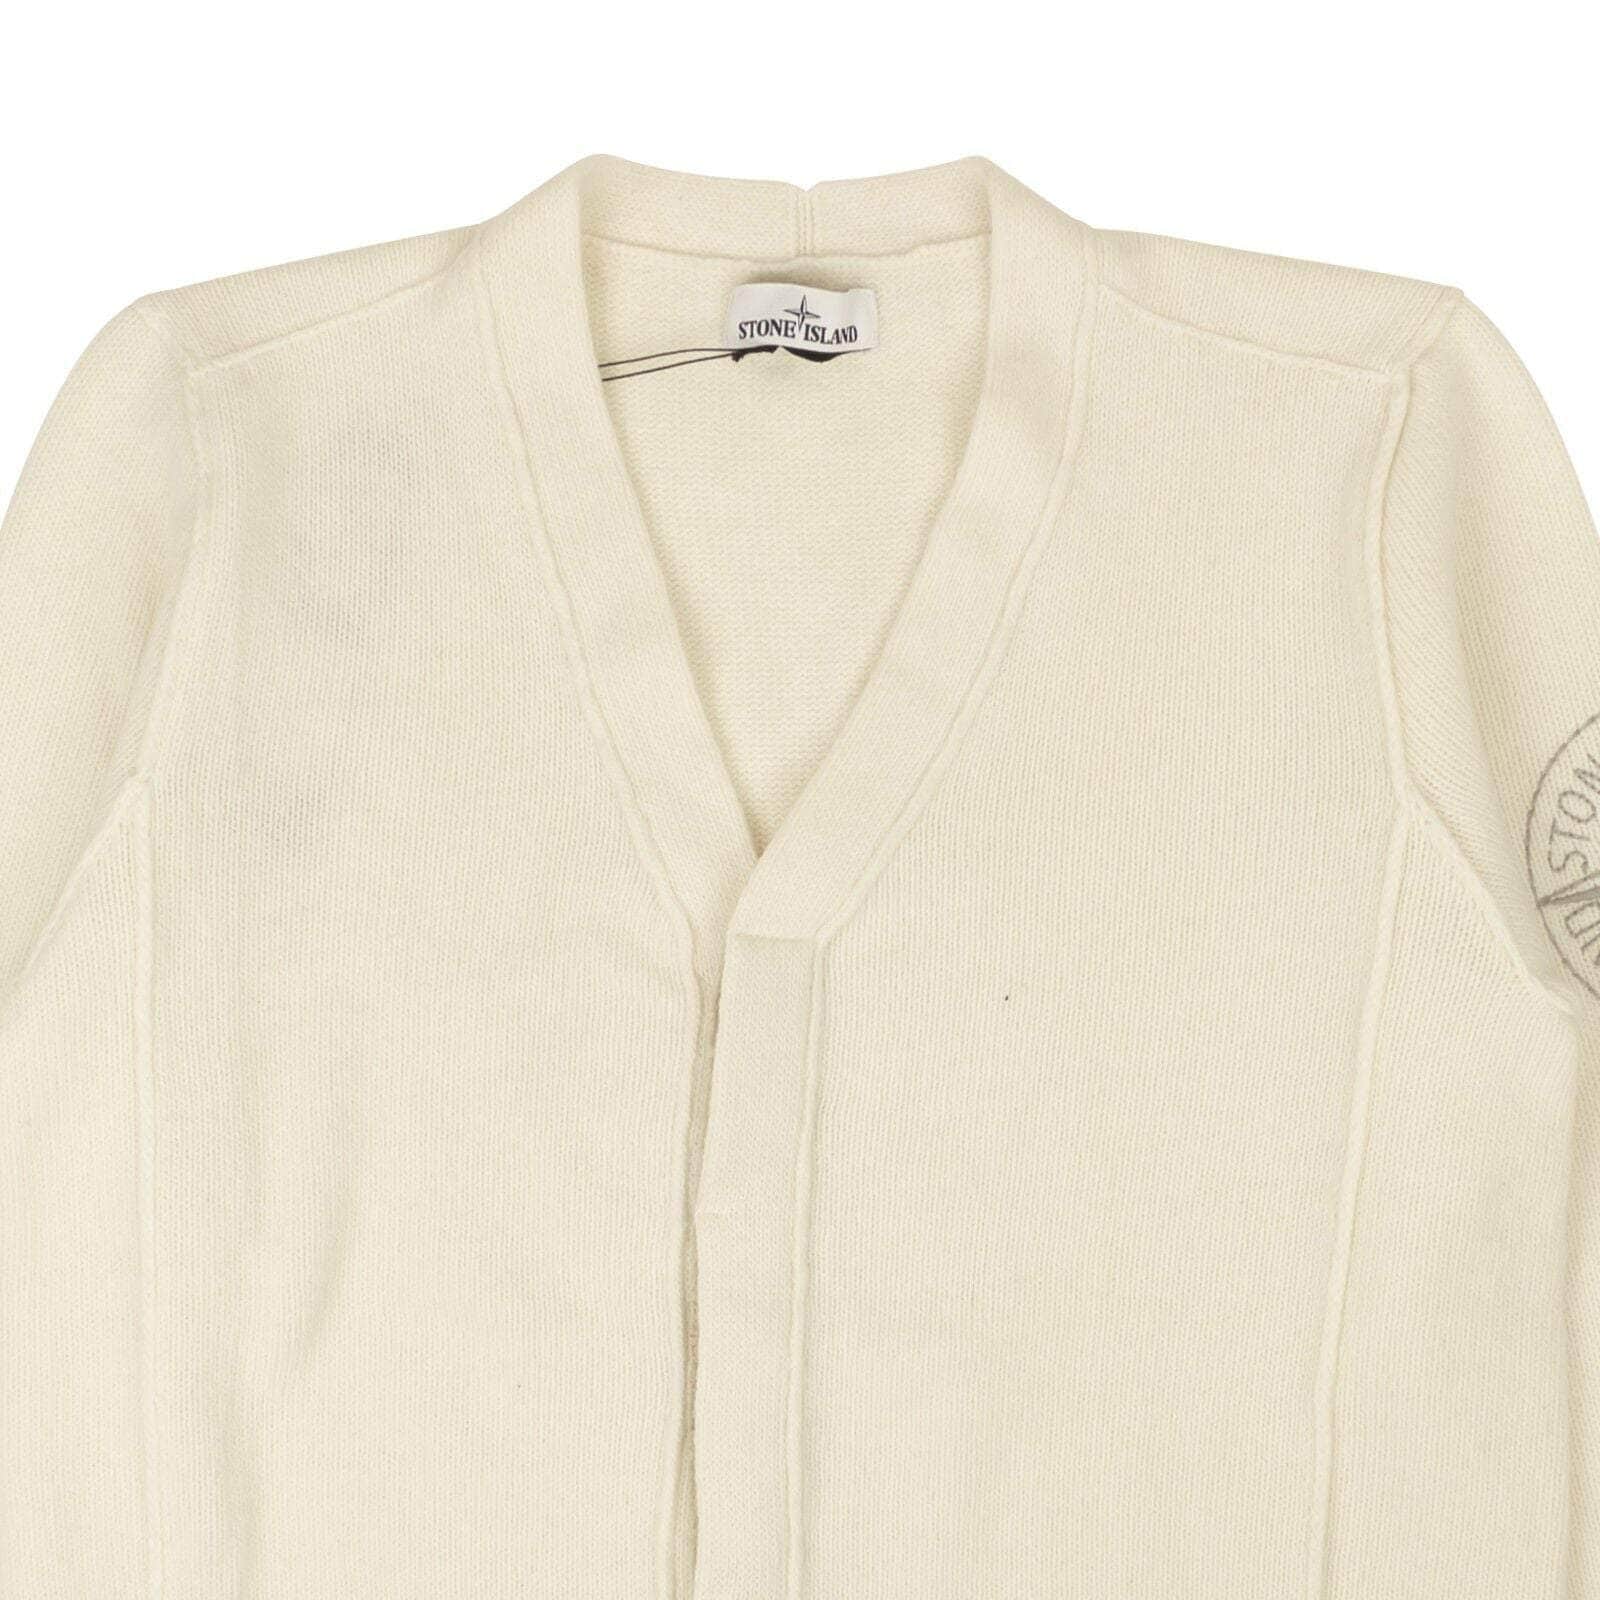 Stone Island 250-500, channelenable-all, chicmi, couponcollection, gender-mens, main-clothing, mens-shoes, size-xl, stone-island XL / MO7115549C7.V0099 Off White Wool Blend Button V-Neck Cardigan 95-STI-1010/XL 95-STI-1010/XL